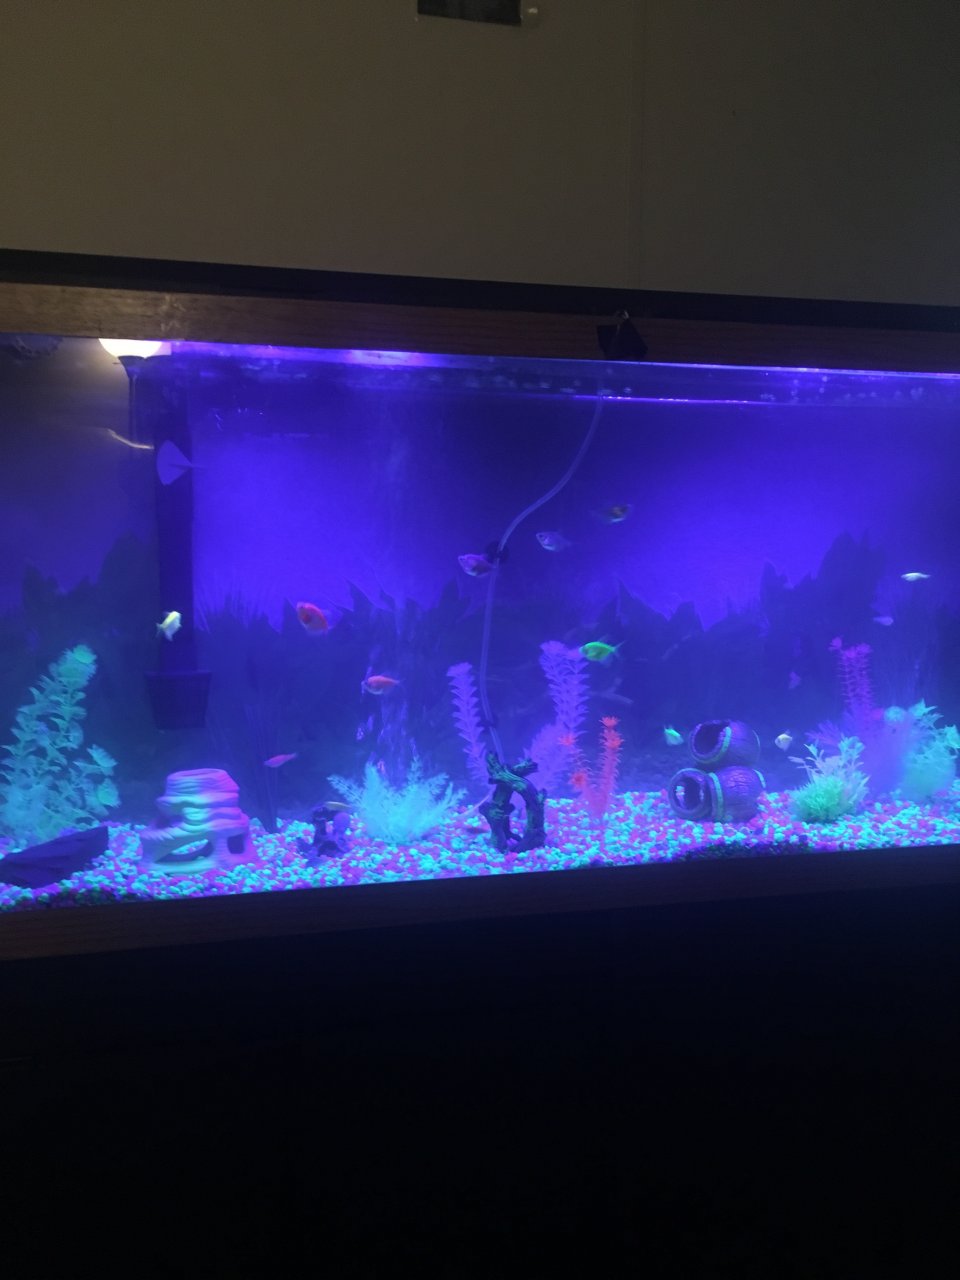 I Have 16 Glofish And 4 Cory Cats. Will They Be Happy? They Are In A 55 Gal